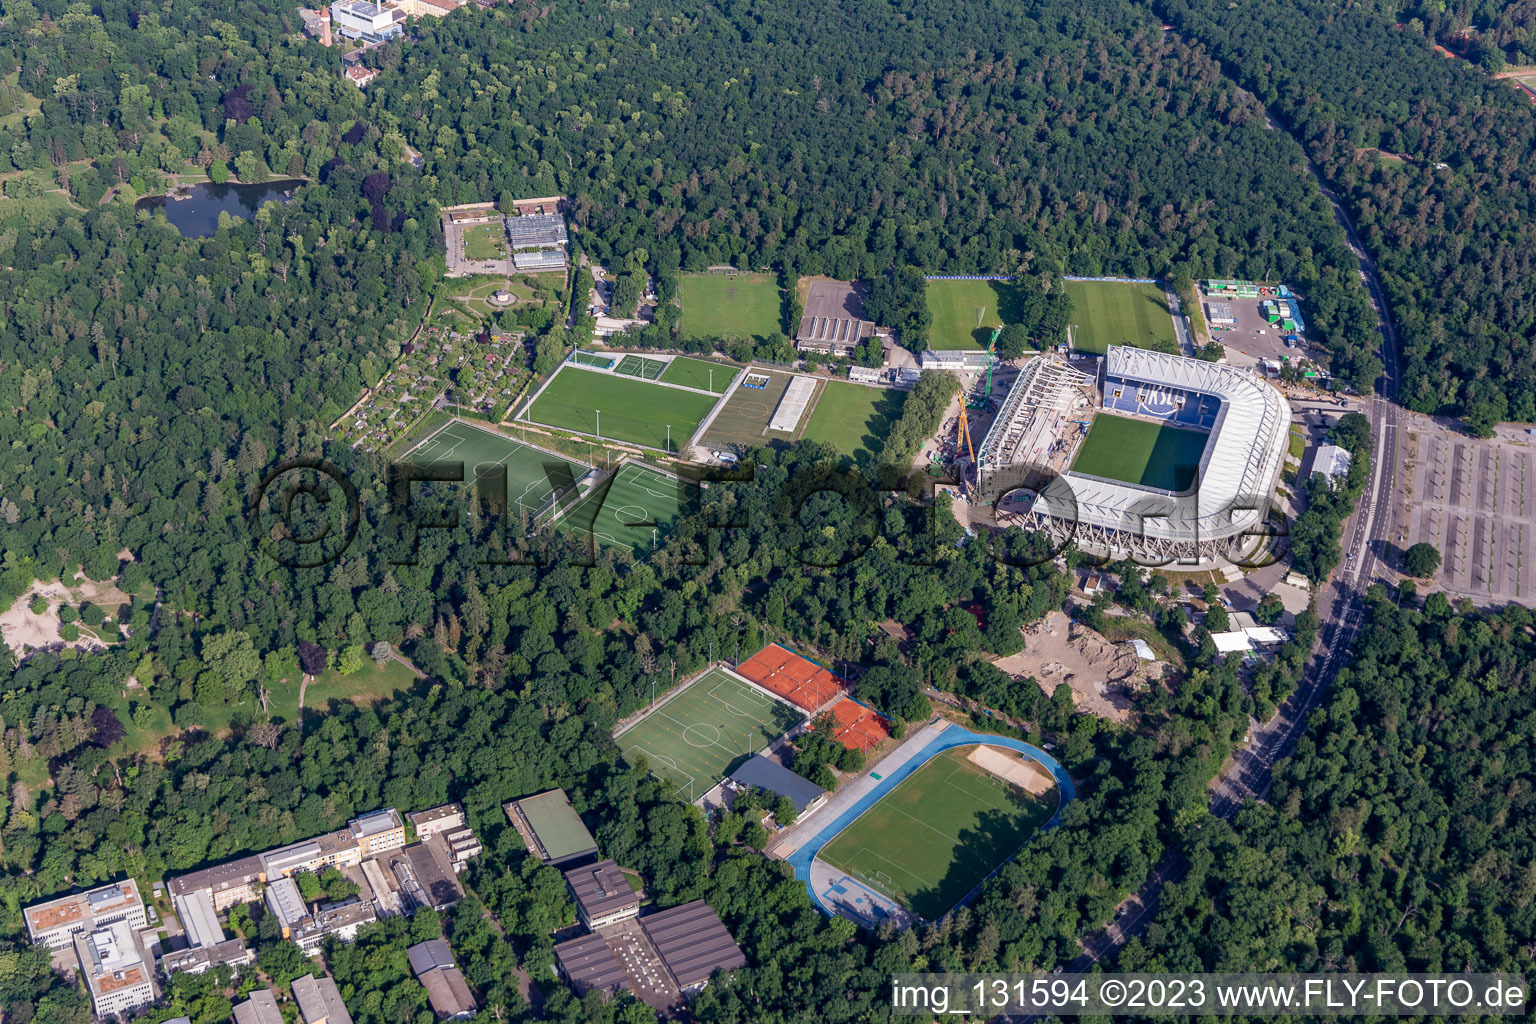 Construction site for the new stadium of Karlsruher Sport-Club GmbH & Co. KGaA in the district Innenstadt-Ost in Karlsruhe in the state Baden-Wuerttemberg, Germany seen from above